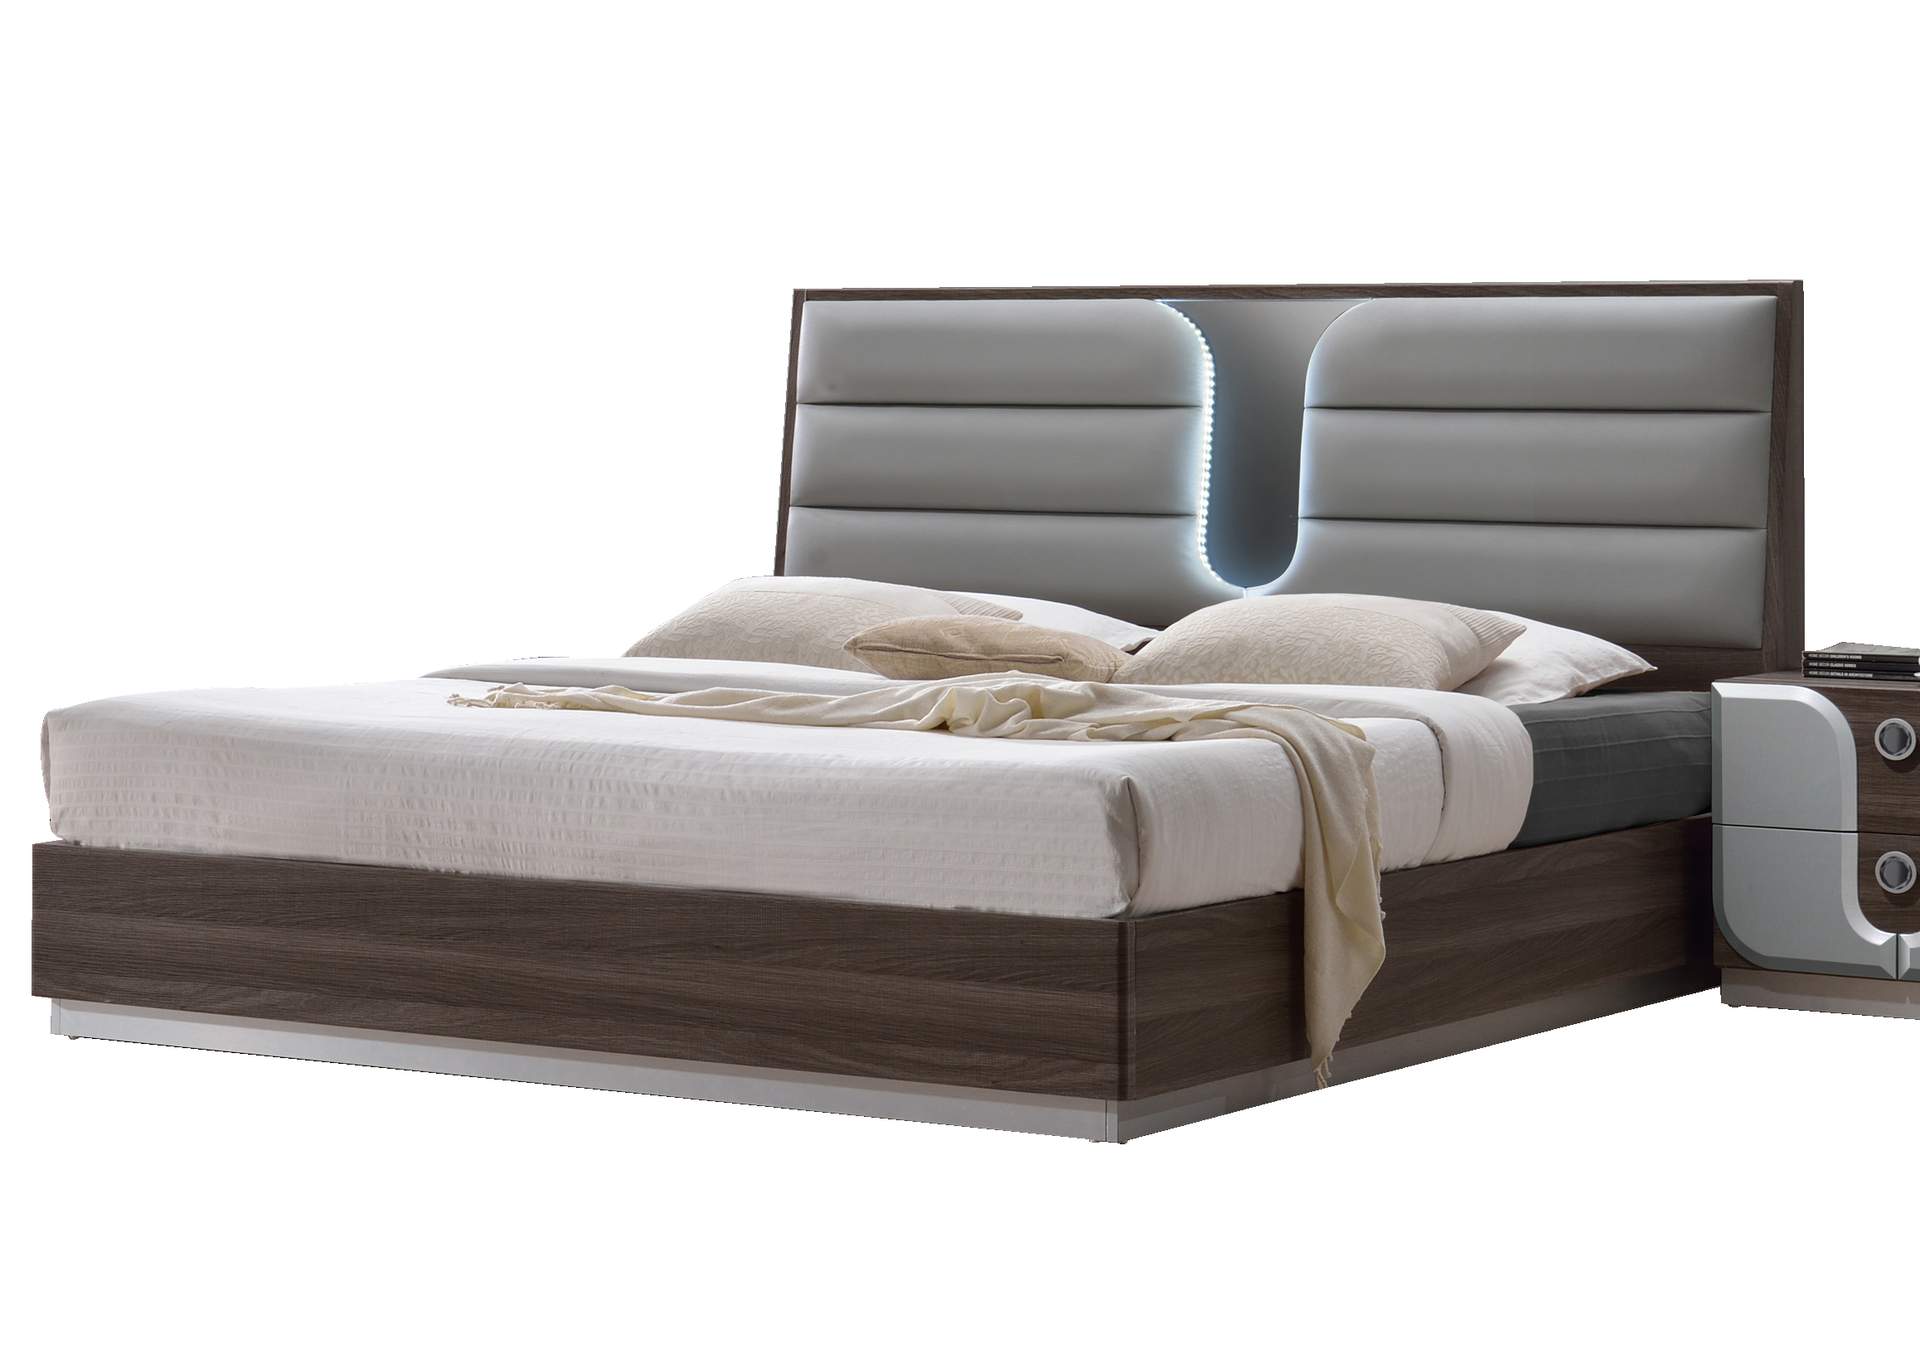 Modern 4-Piece Bedroom Set w/ King Size Bed,Chintaly Imports